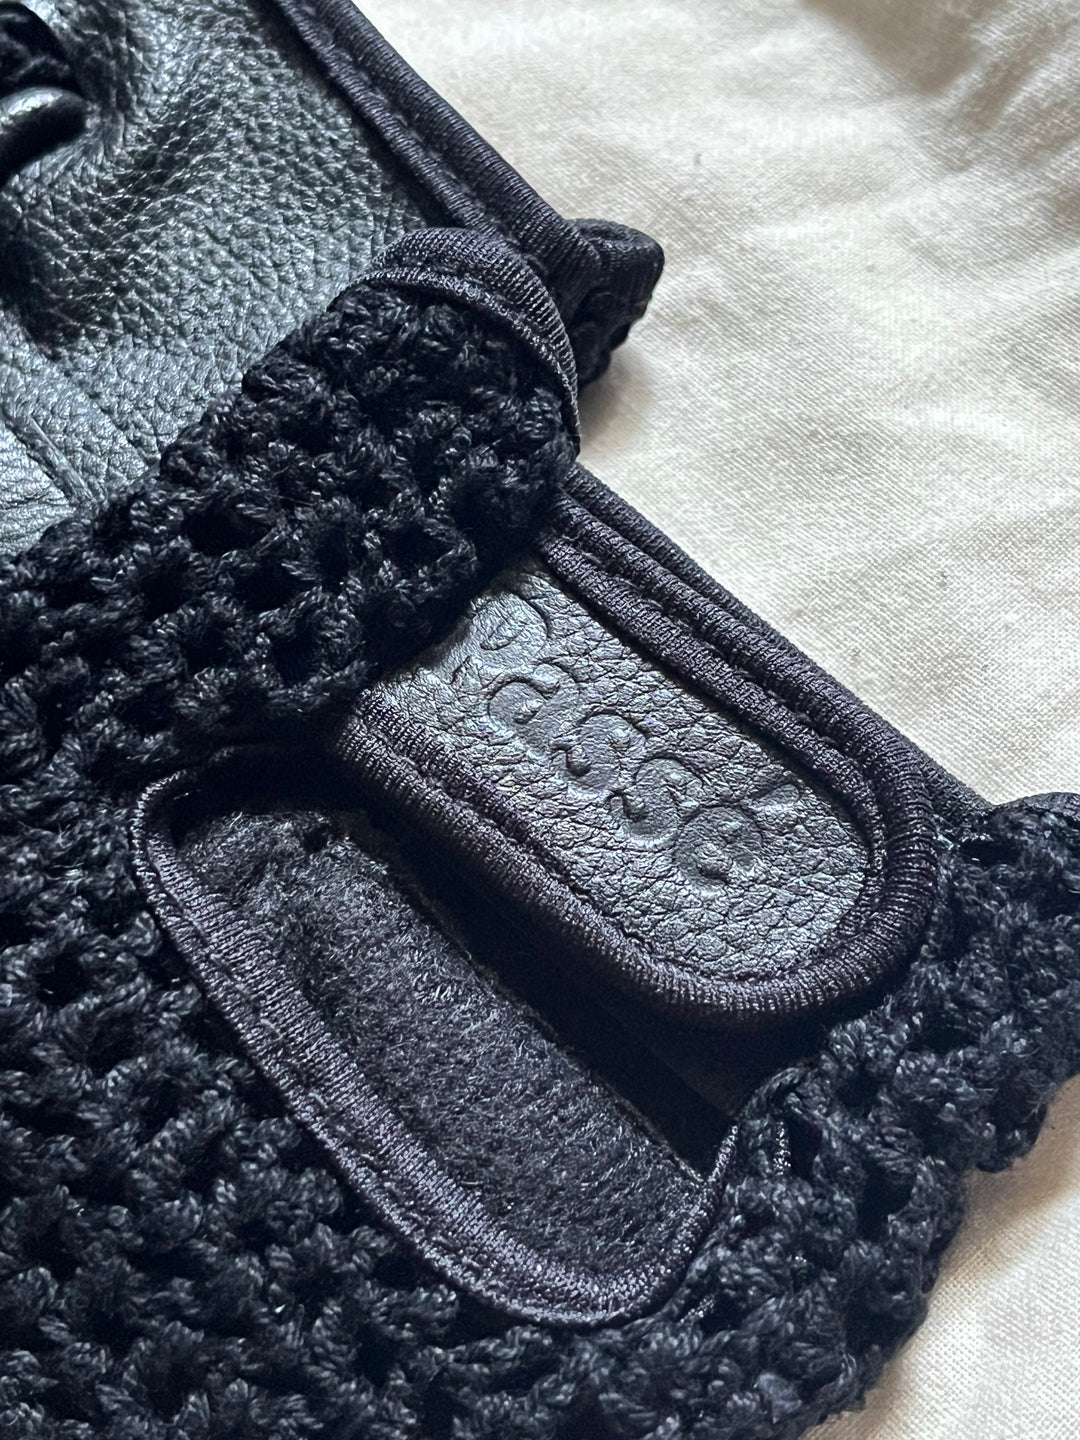 PASSE Leather Crocheted Gloves (Triple Black)